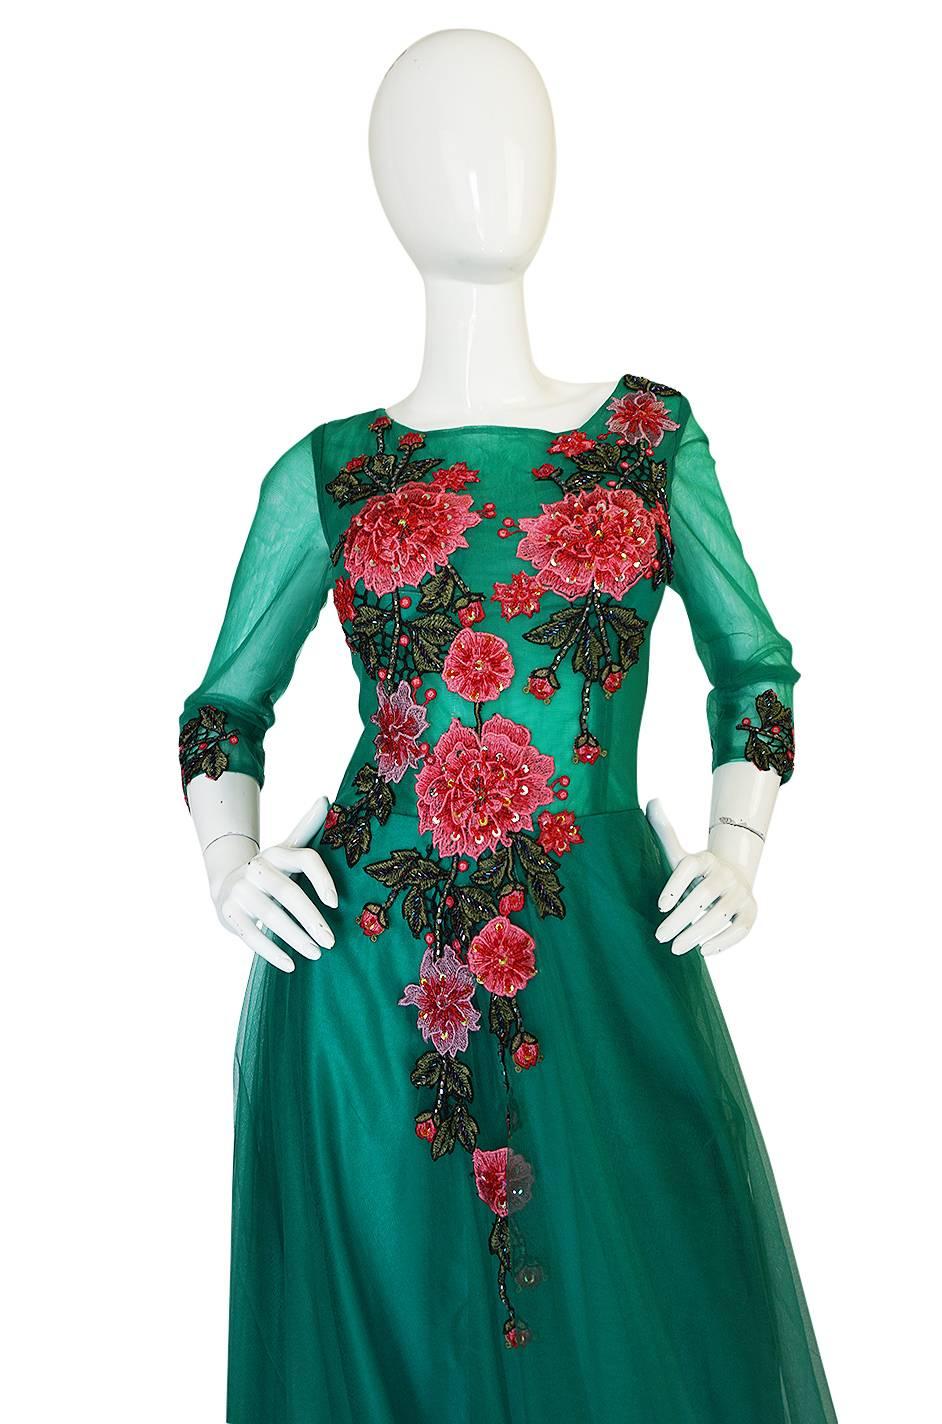 Women's Vintage Trained Emerald Green Lace Tulle Gown w Floral Applique